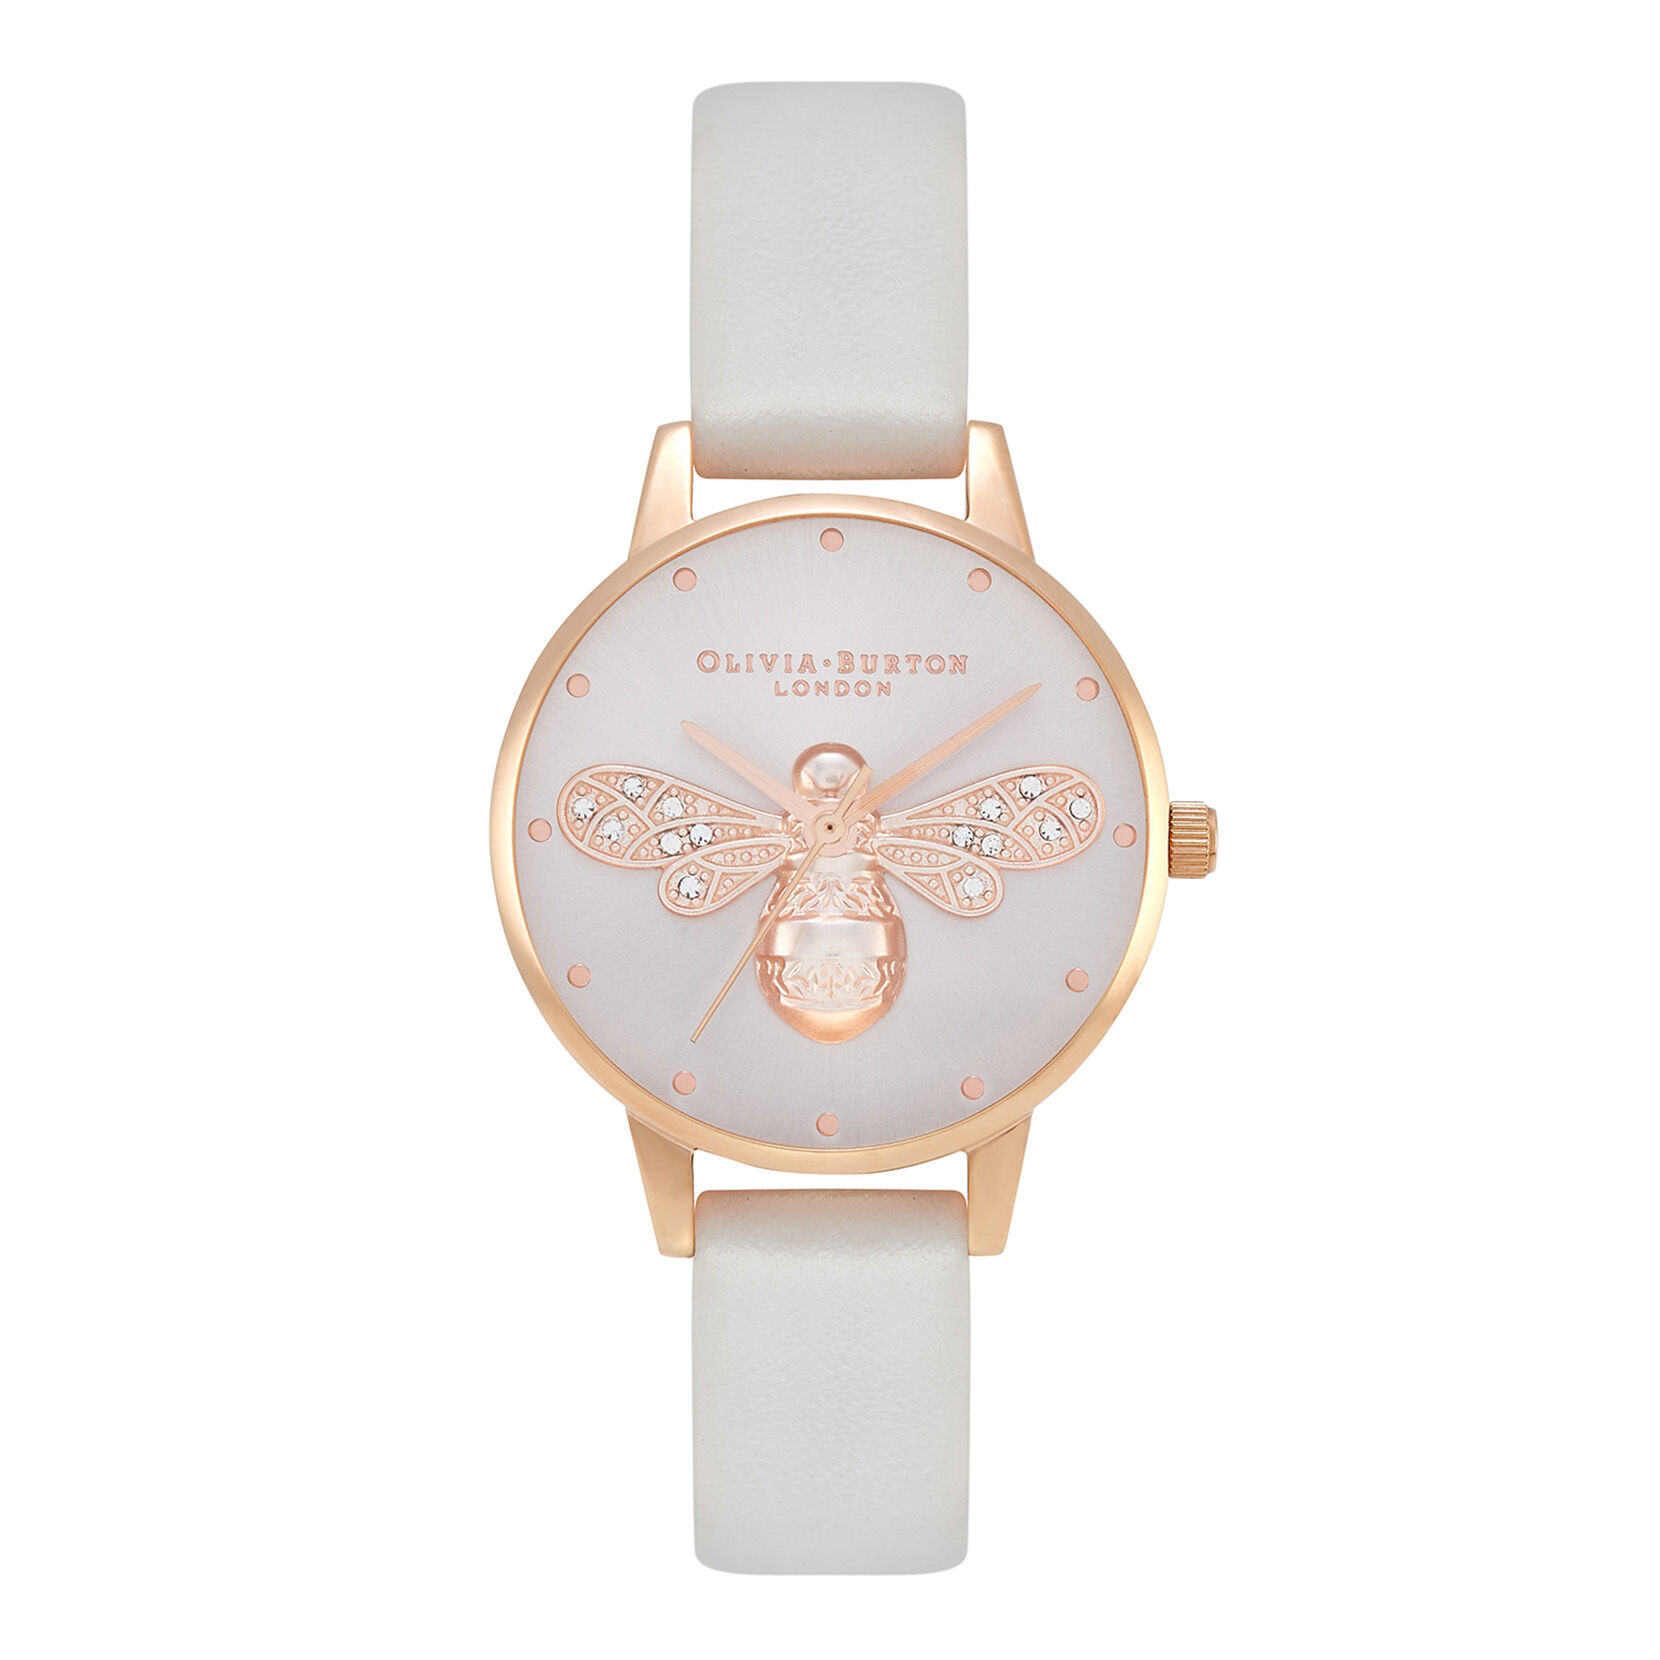 Sparkle Bee Midi Dial Watch & Bangle Rose Gold Gift Set